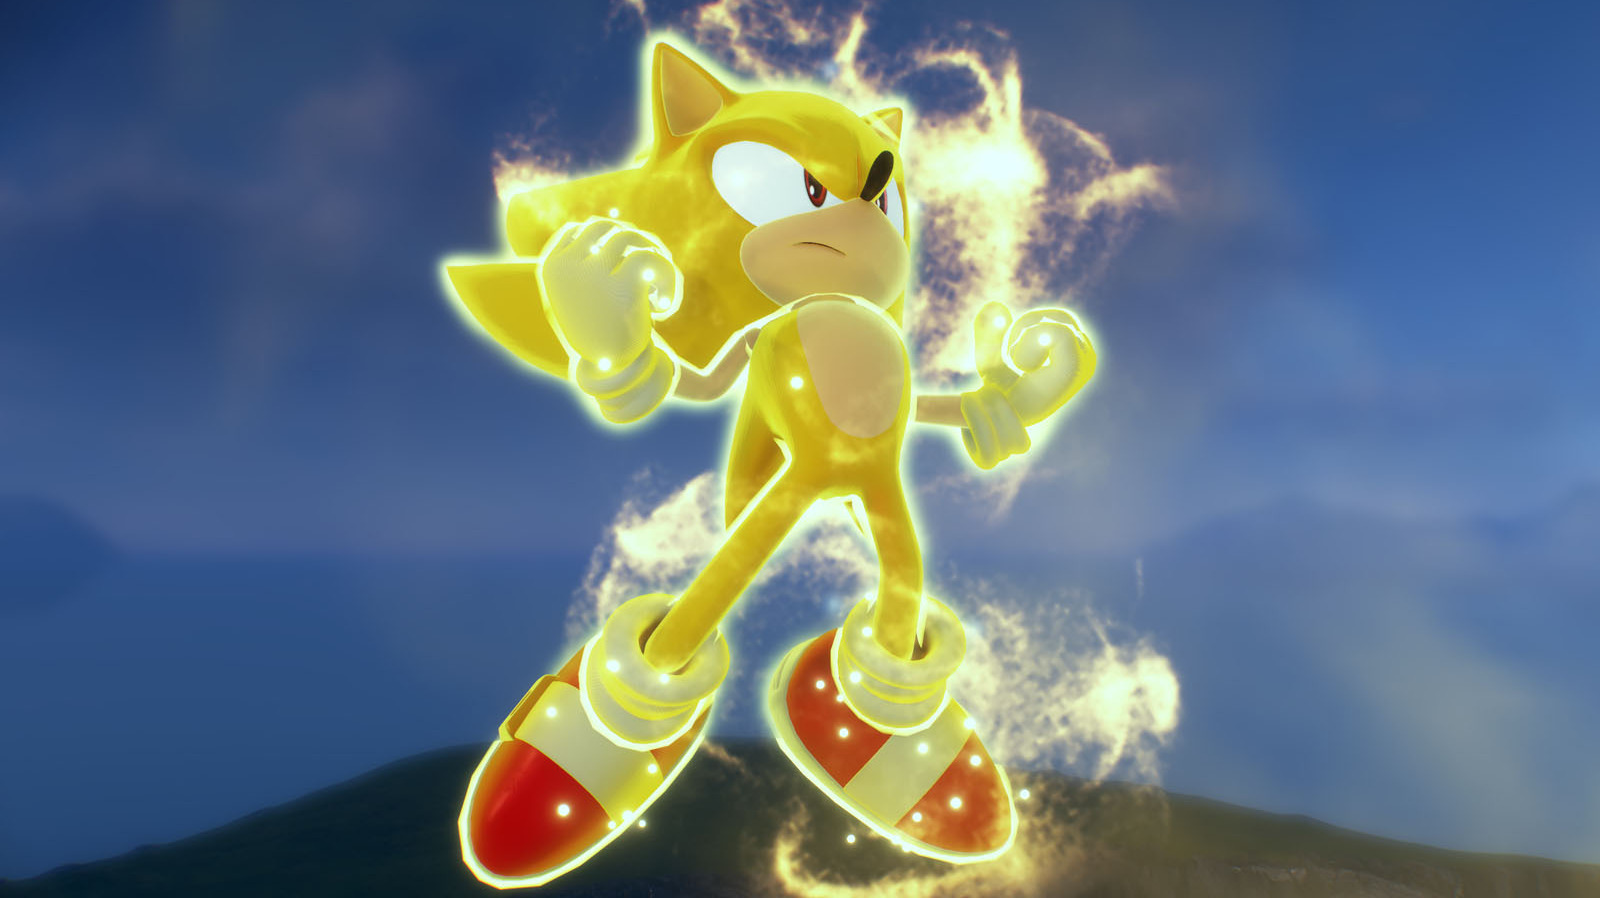 Sonic X  Sonic defeats Eggman with the power of chaos emeralds 